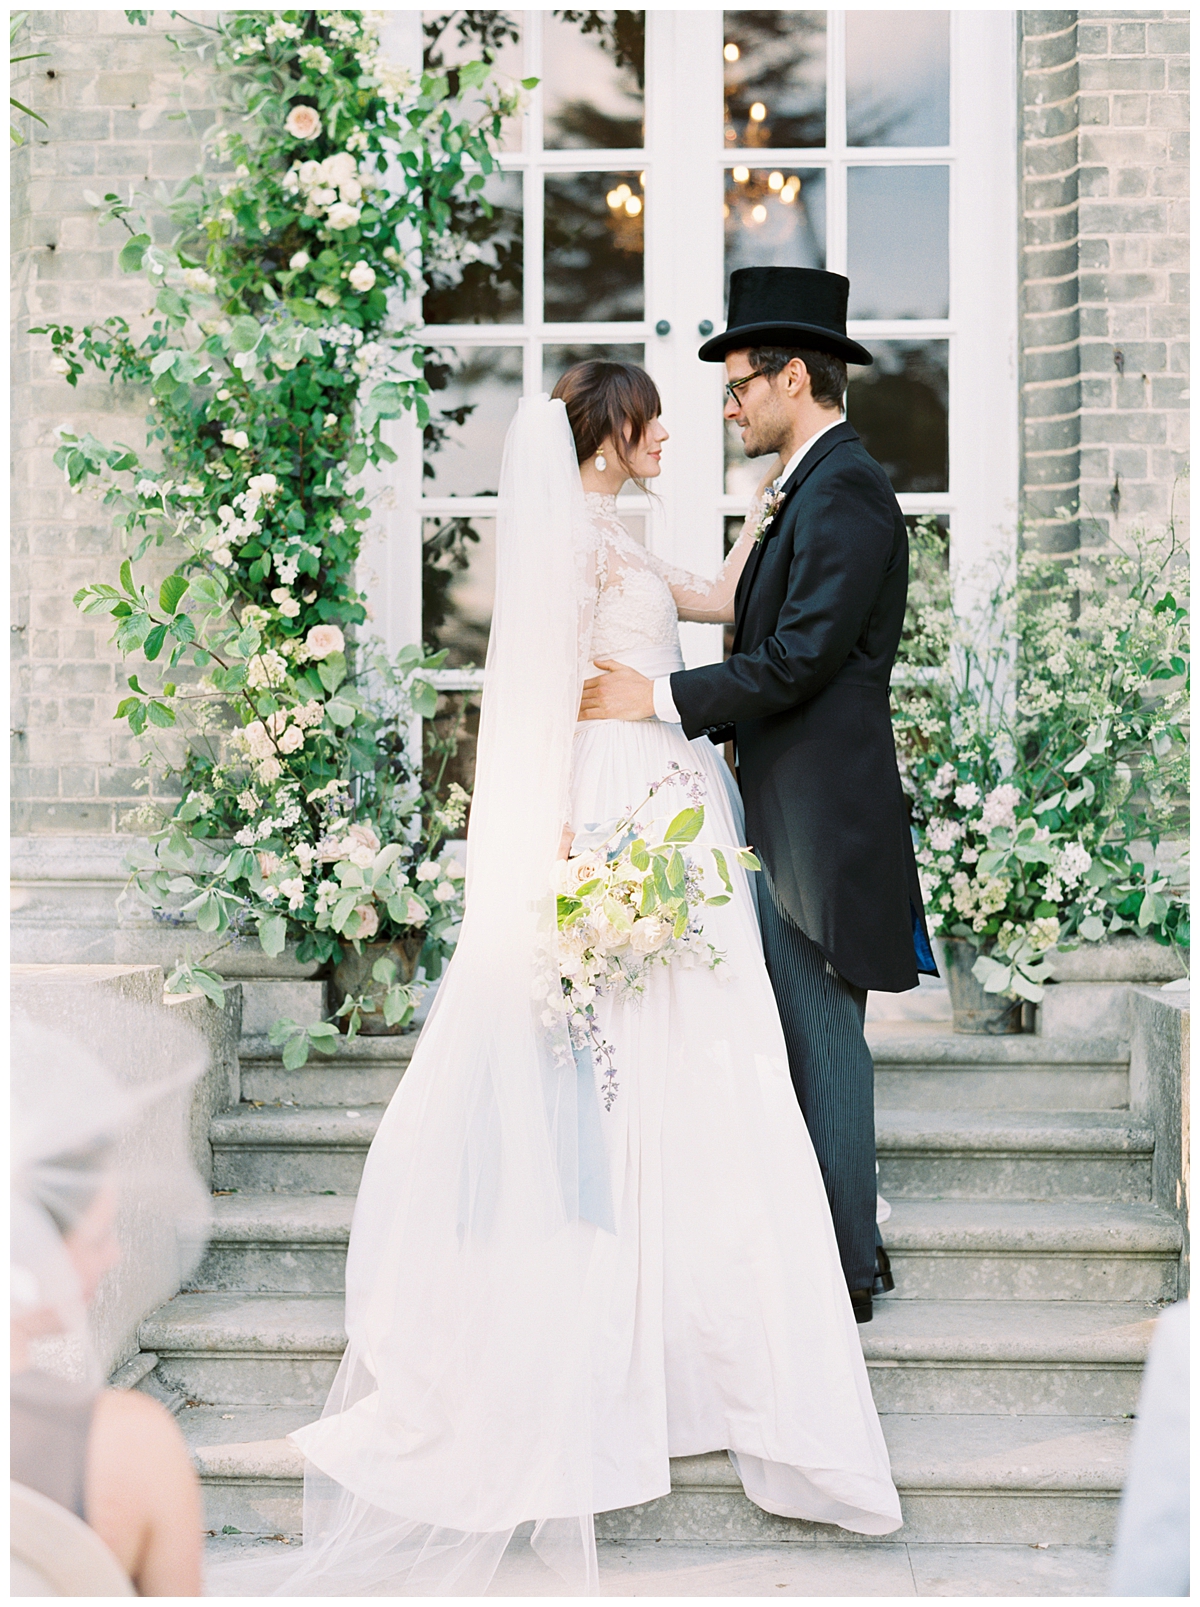 A couple poses for a wedding portrait on a set of steps in front of a floral altar. They are dressed in black tie and he is wearing a top hat. 